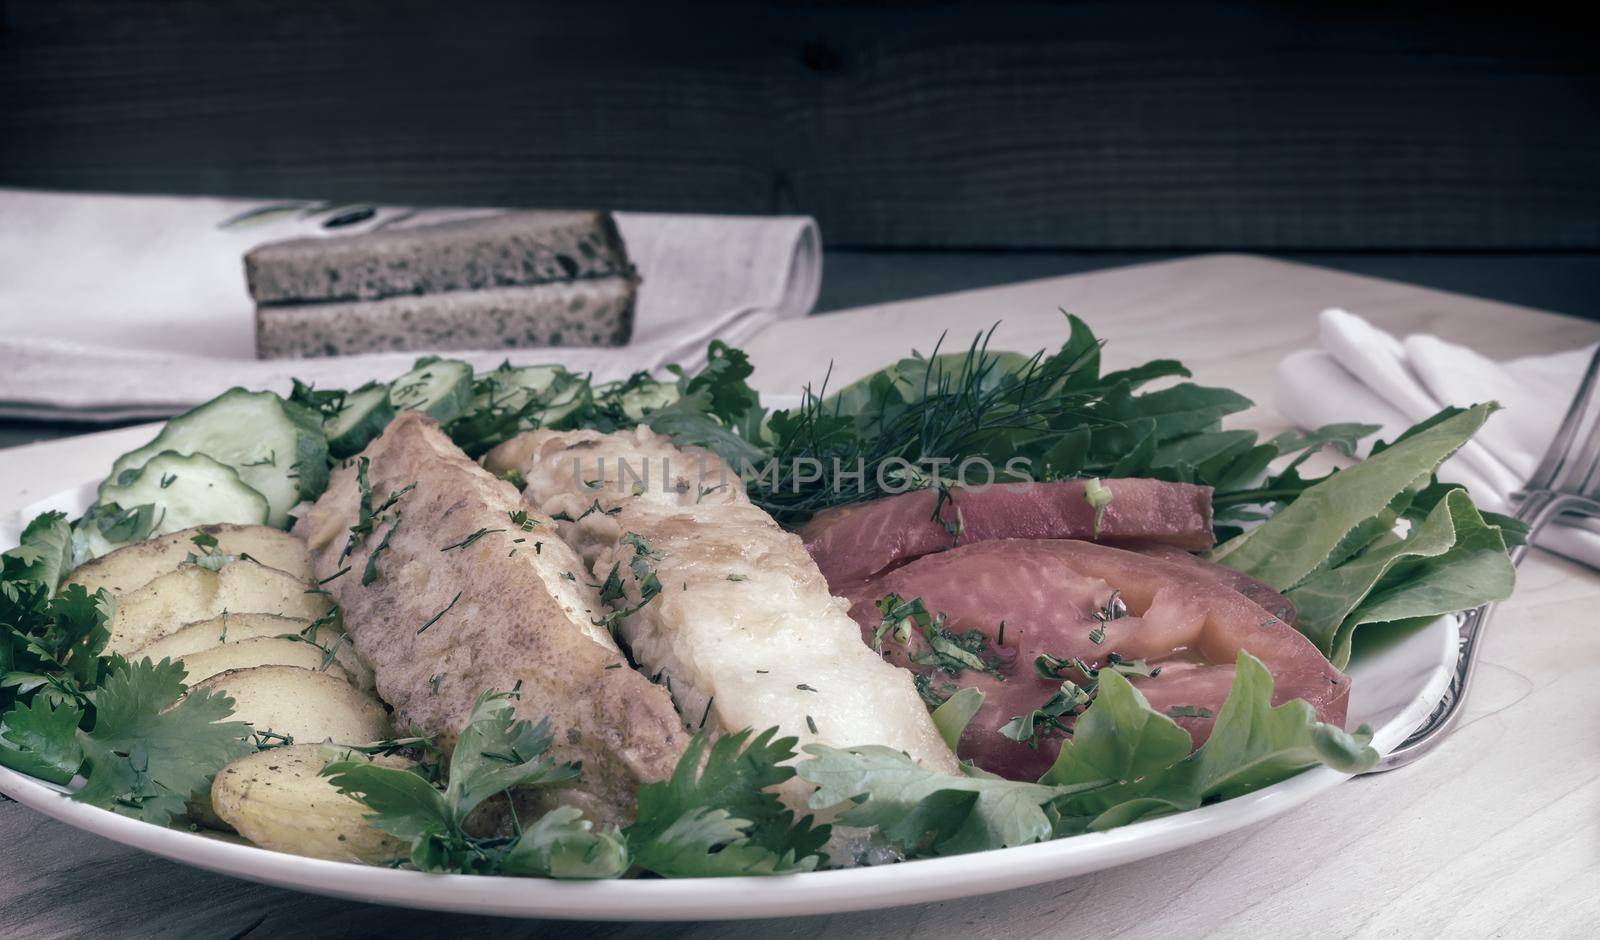 Fried fish with potatoes, vegetables and herbs by georgina198